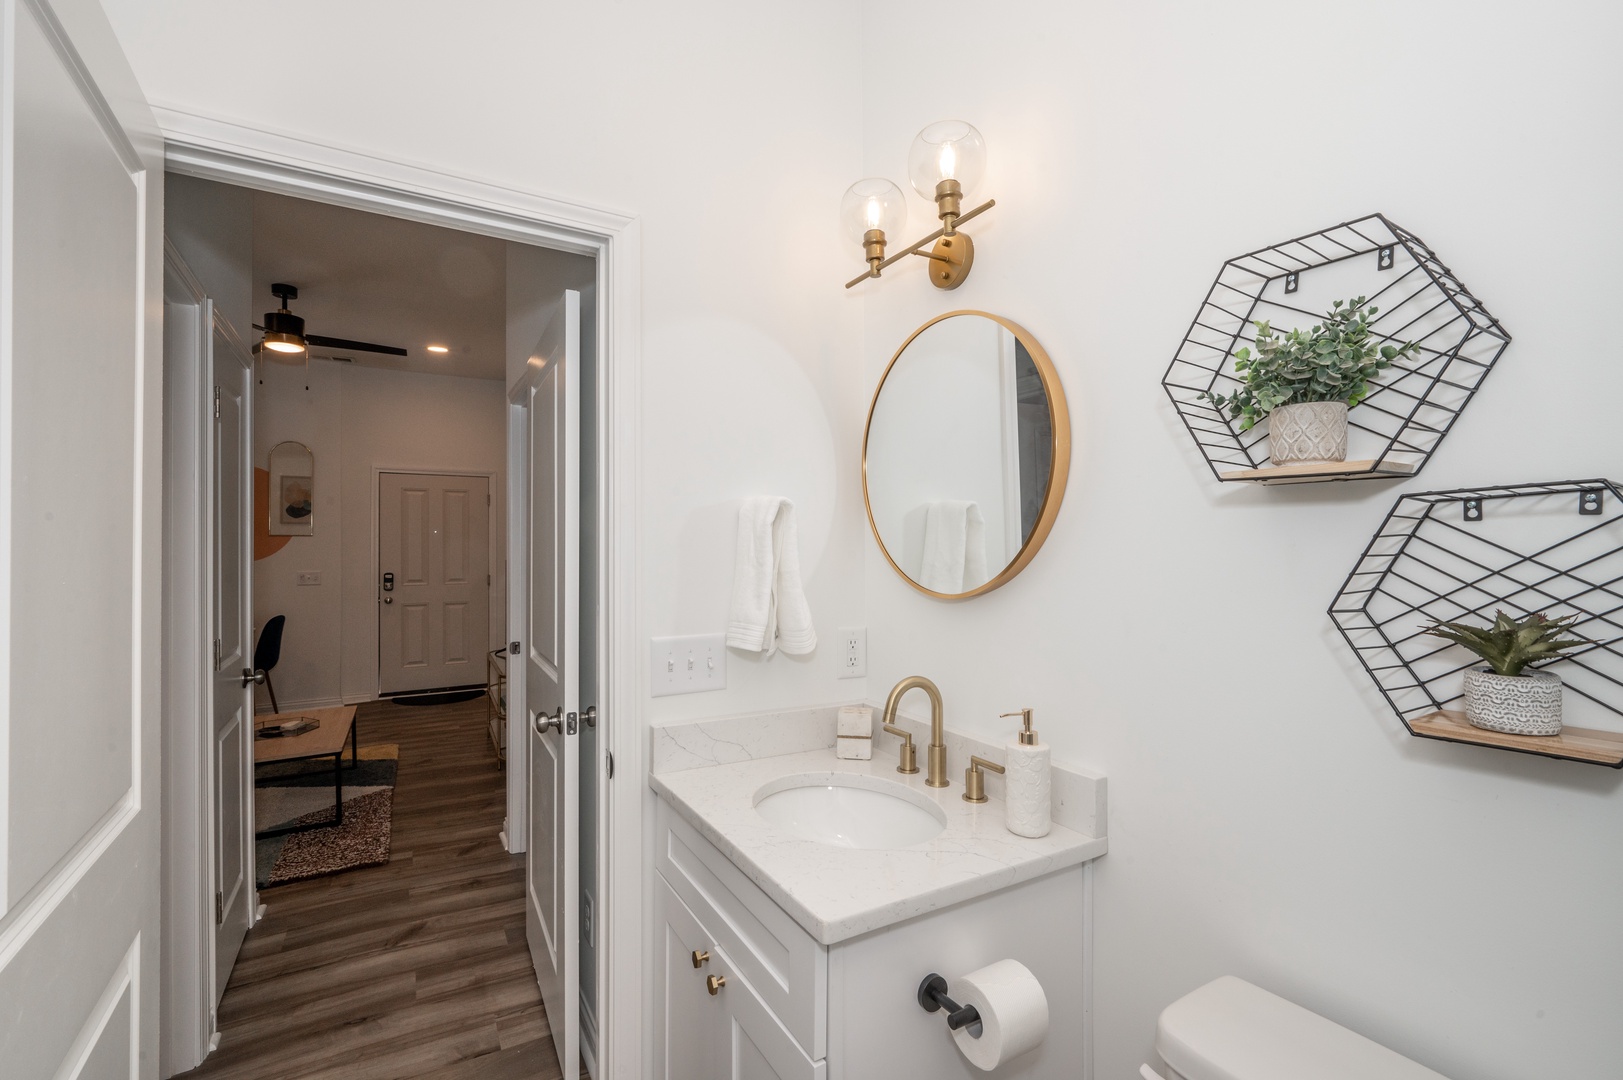 Unit 202: The bathroom offers a chic single vanity and luxurious glass shower